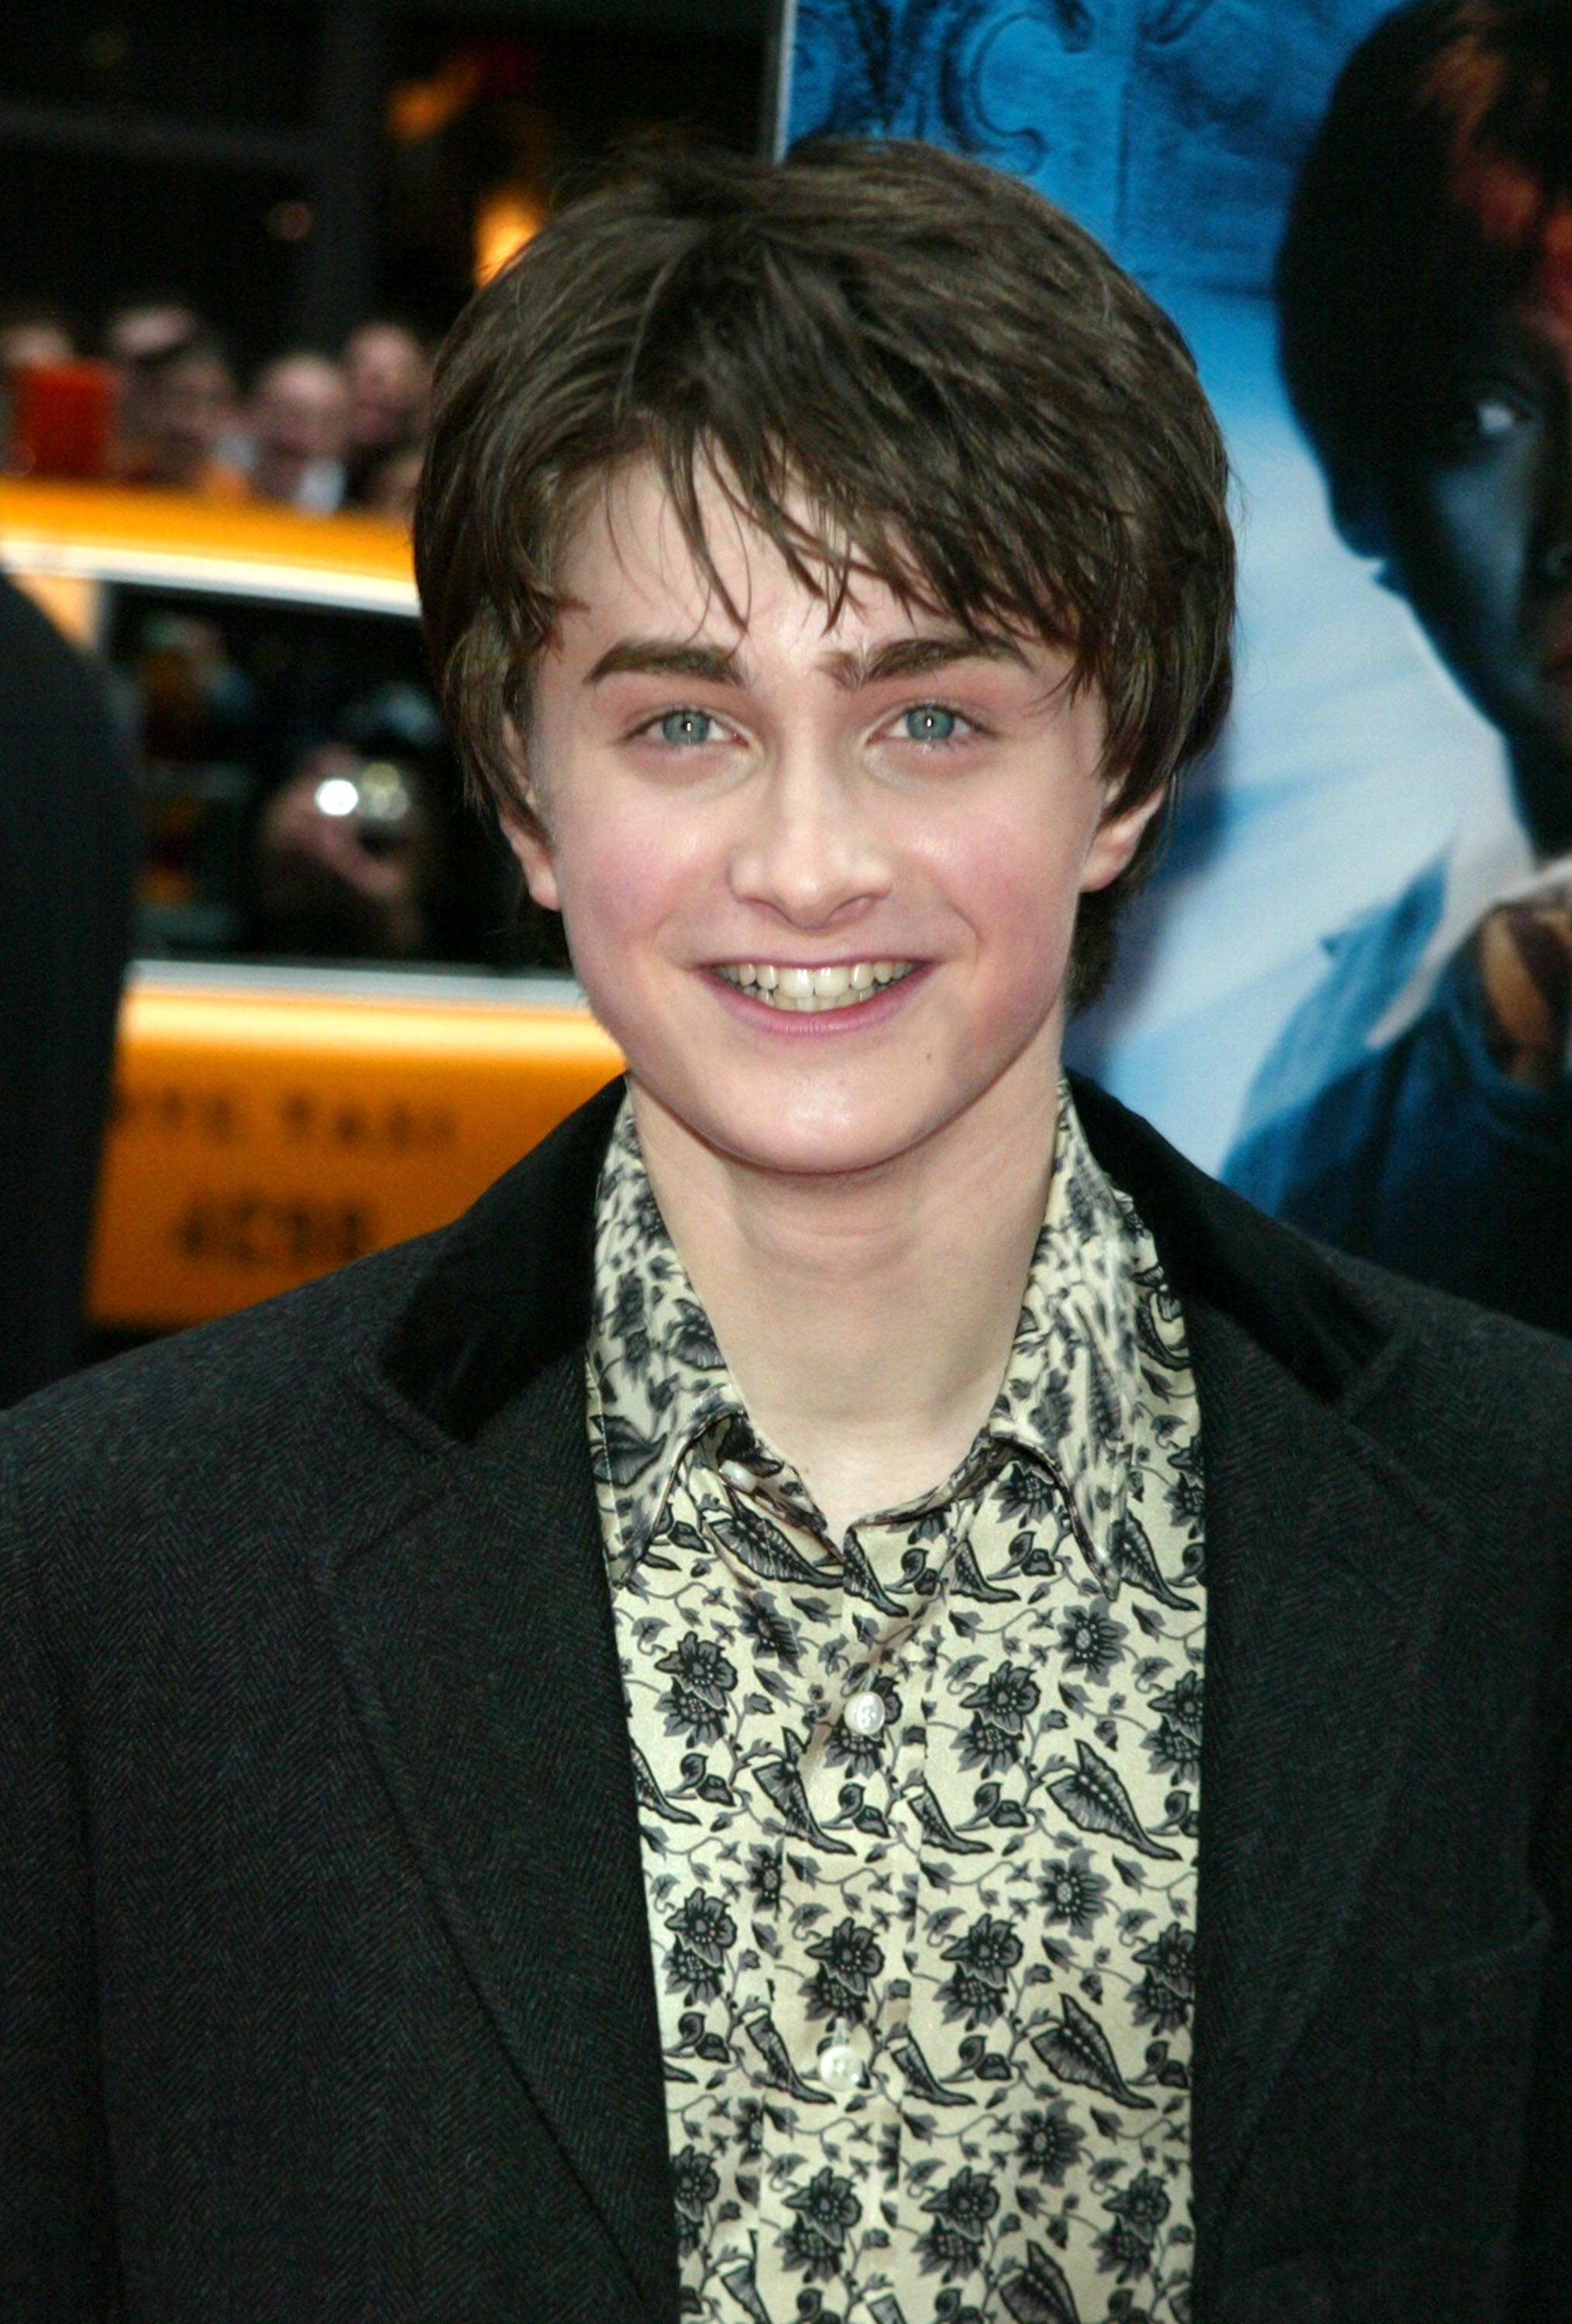 The boy at the "Harry Potter and the Chamber of Secrets" premiere in New York City on November 10, 2002 | Source: Getty Images